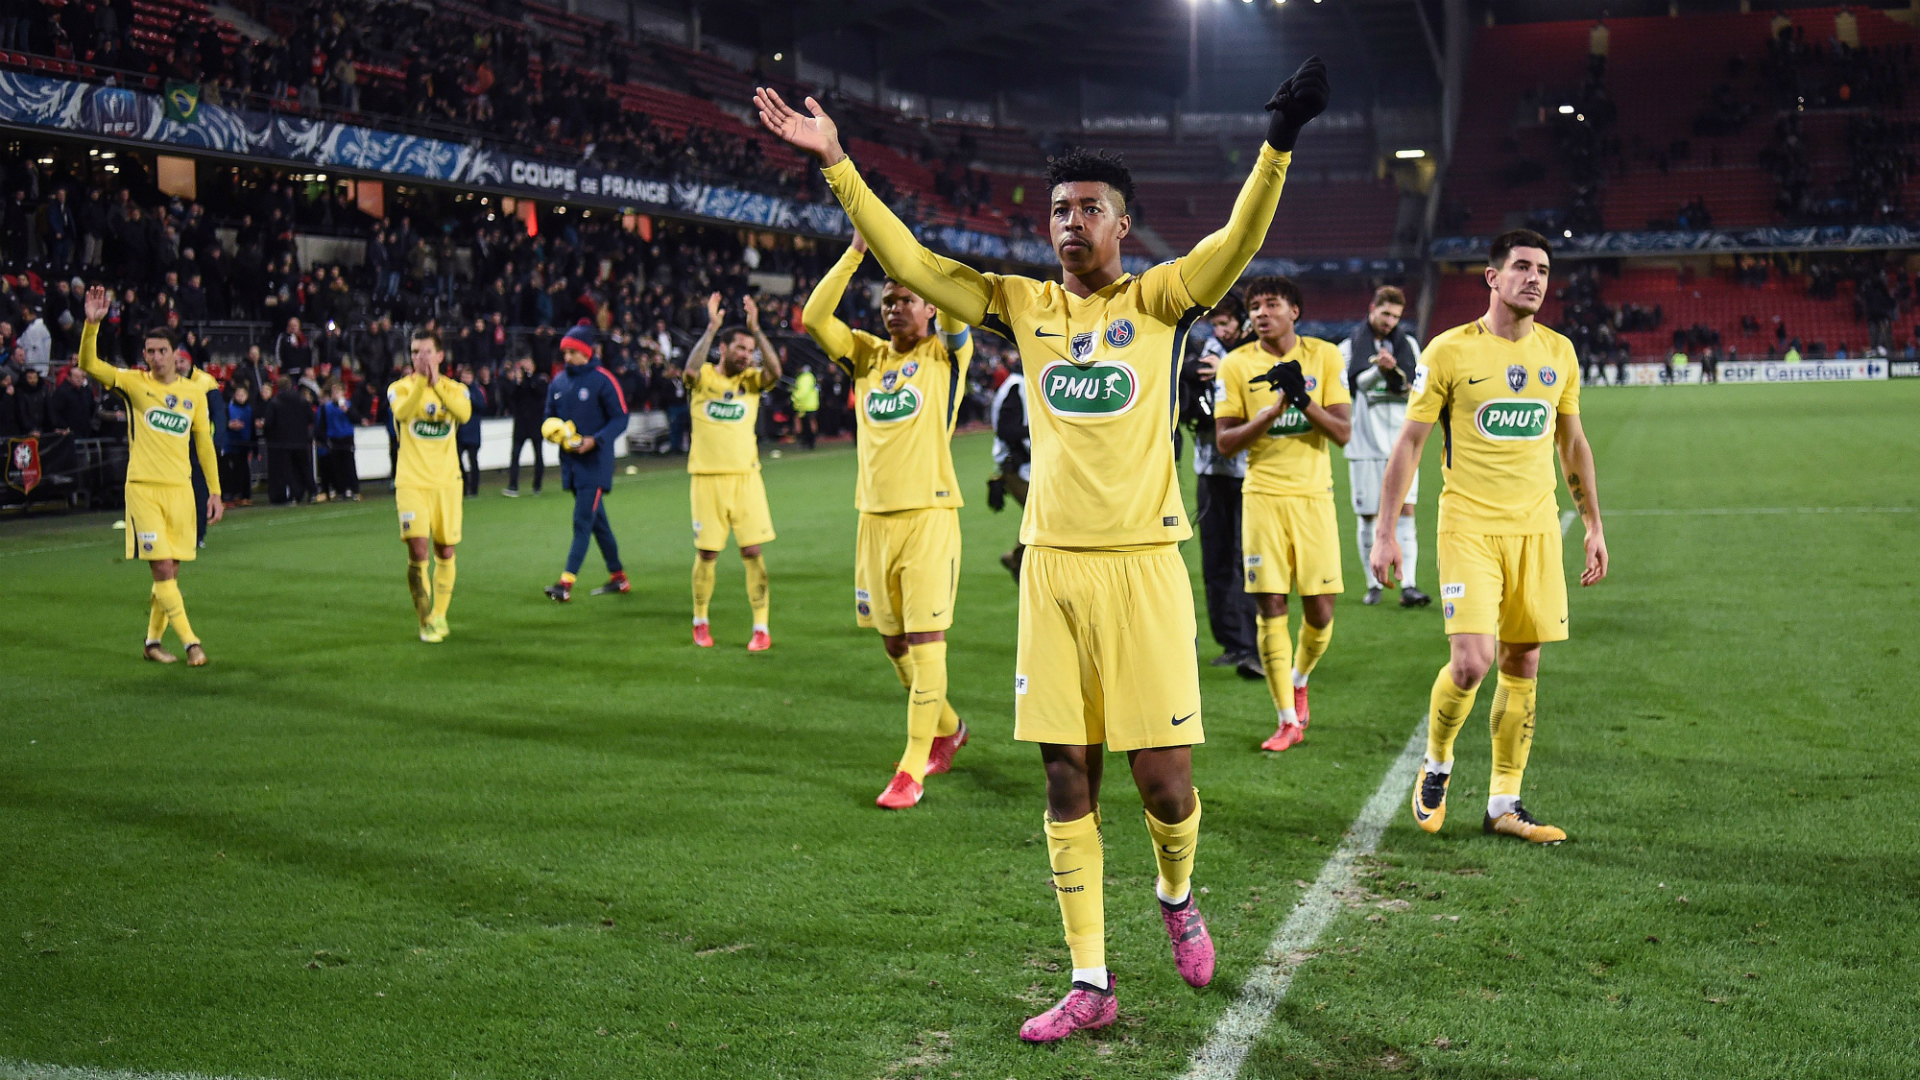 Presnel Kimpembe is the future star who won't cost PSG a penny